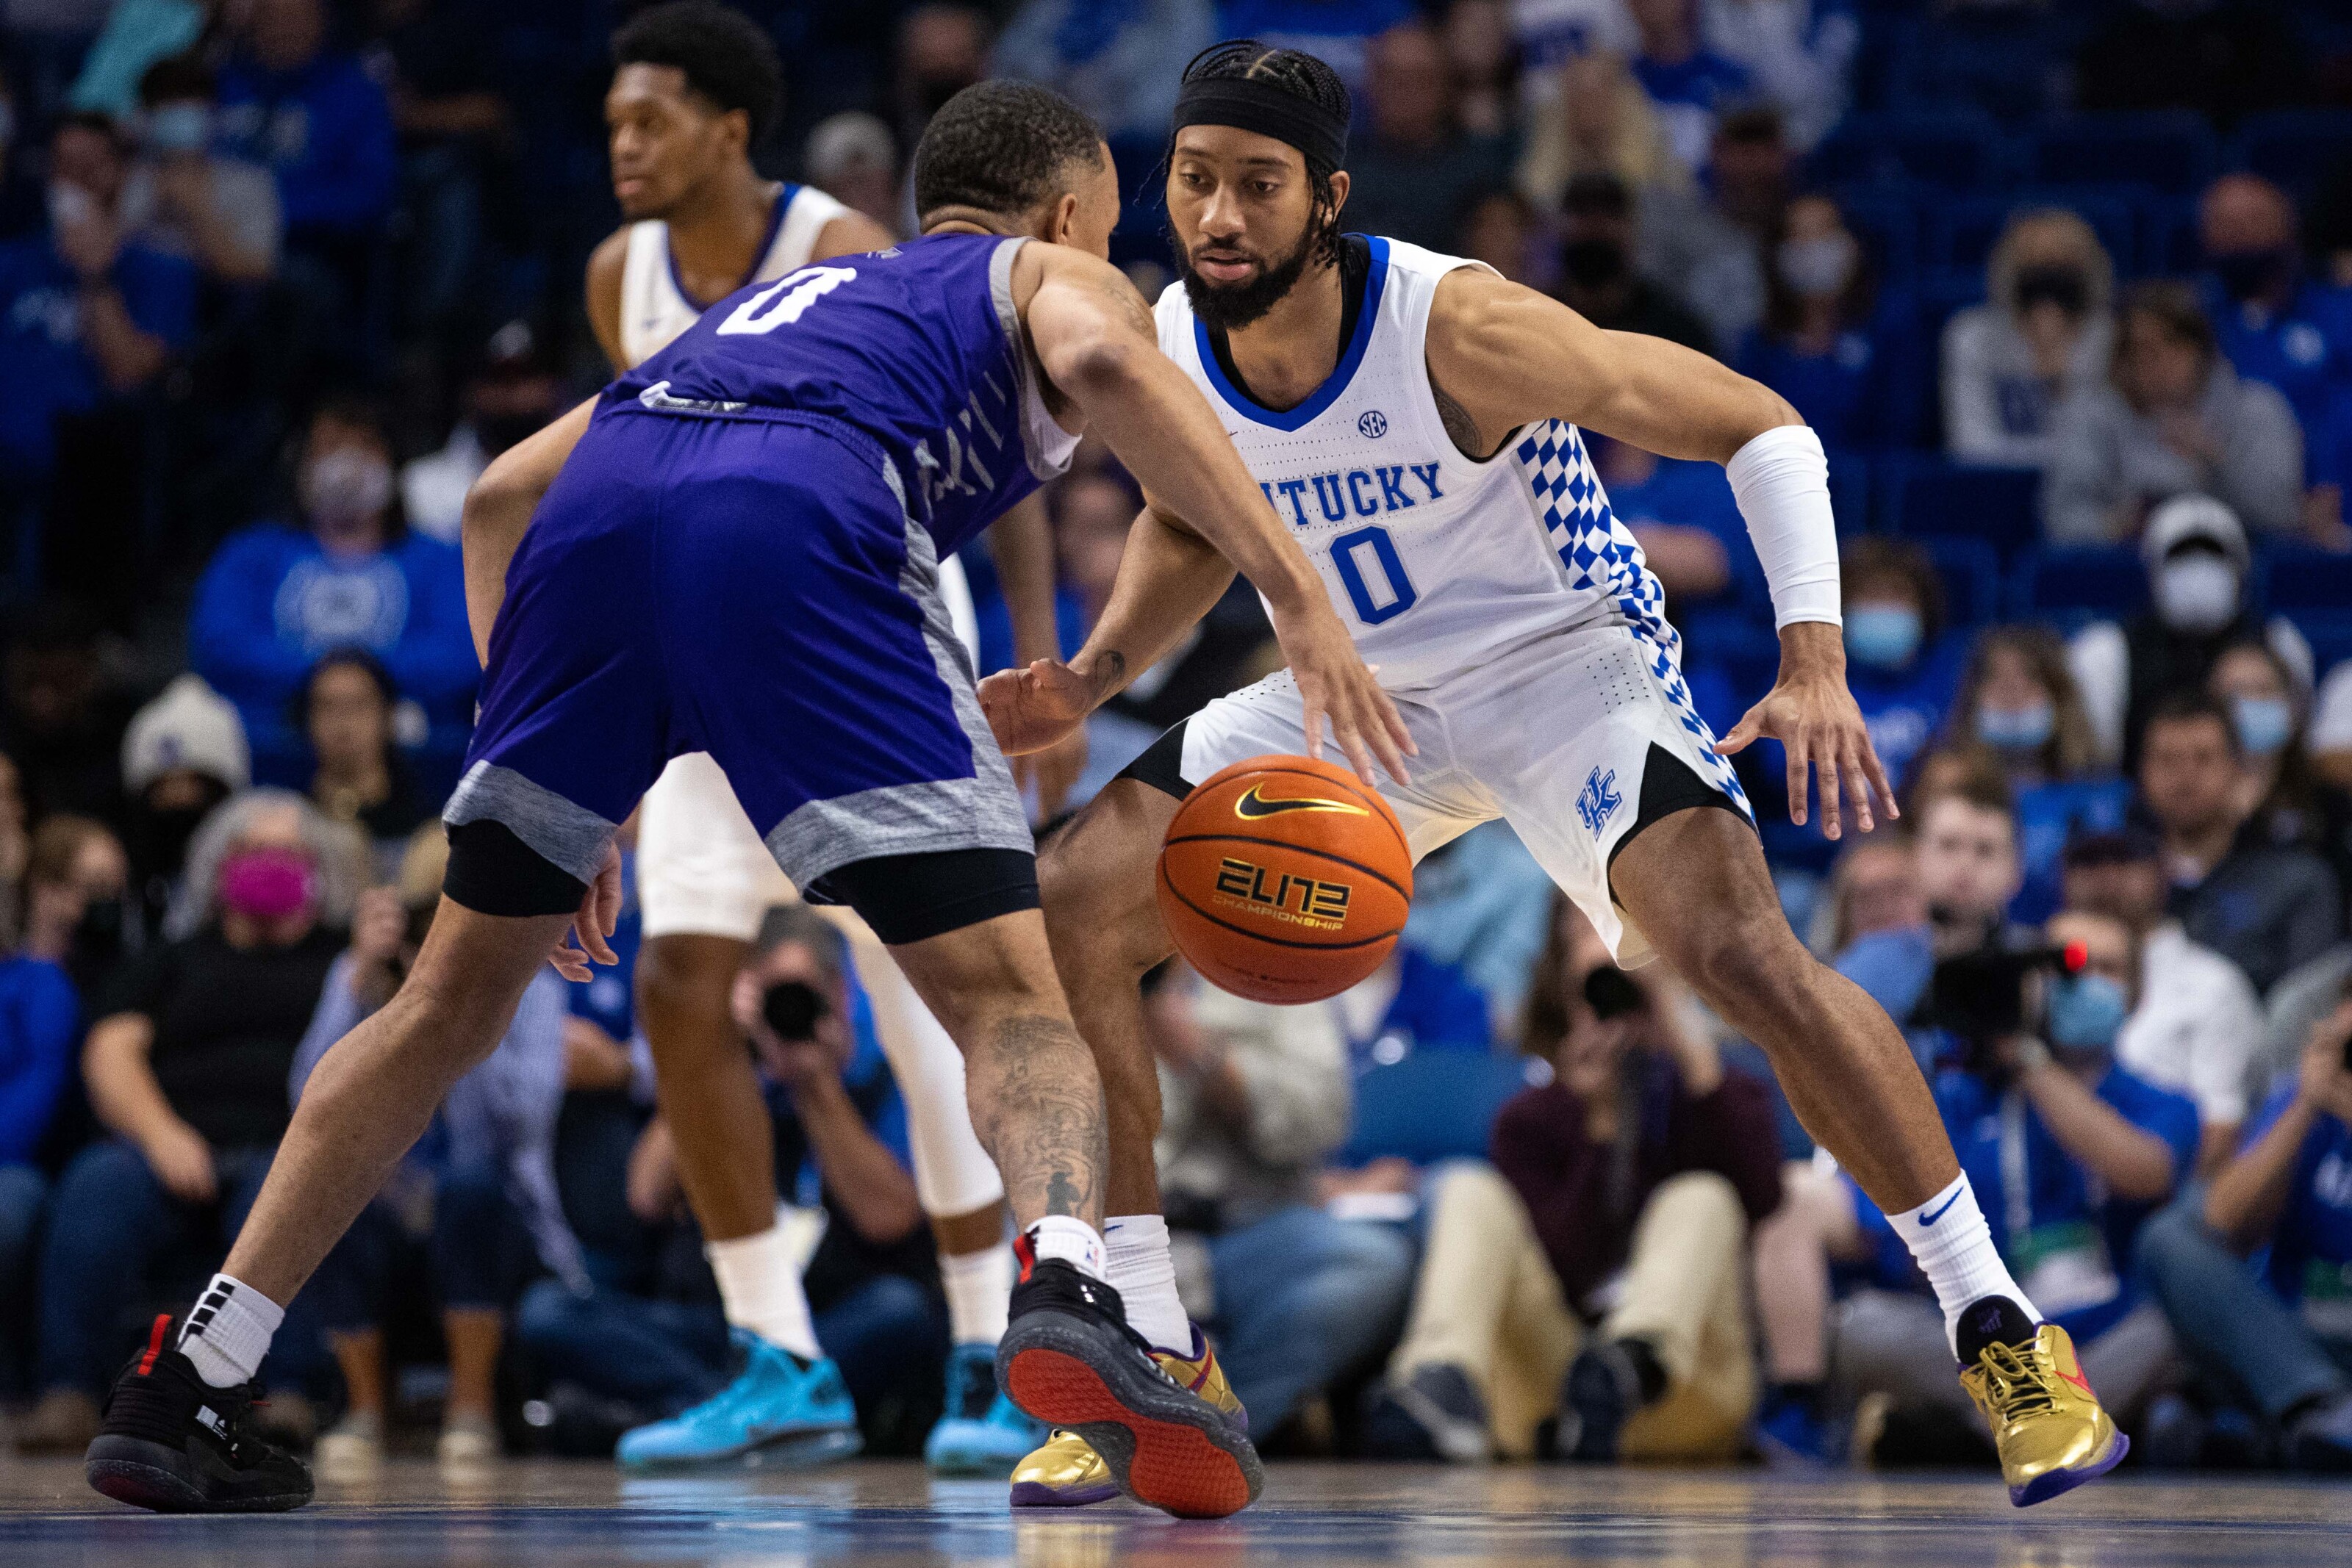 Kentucky Basketball Game Tonight Kentucky vs Miles College, Line, Predictions, Odds, TV Channel and Live Stream for Basketball Game Nov